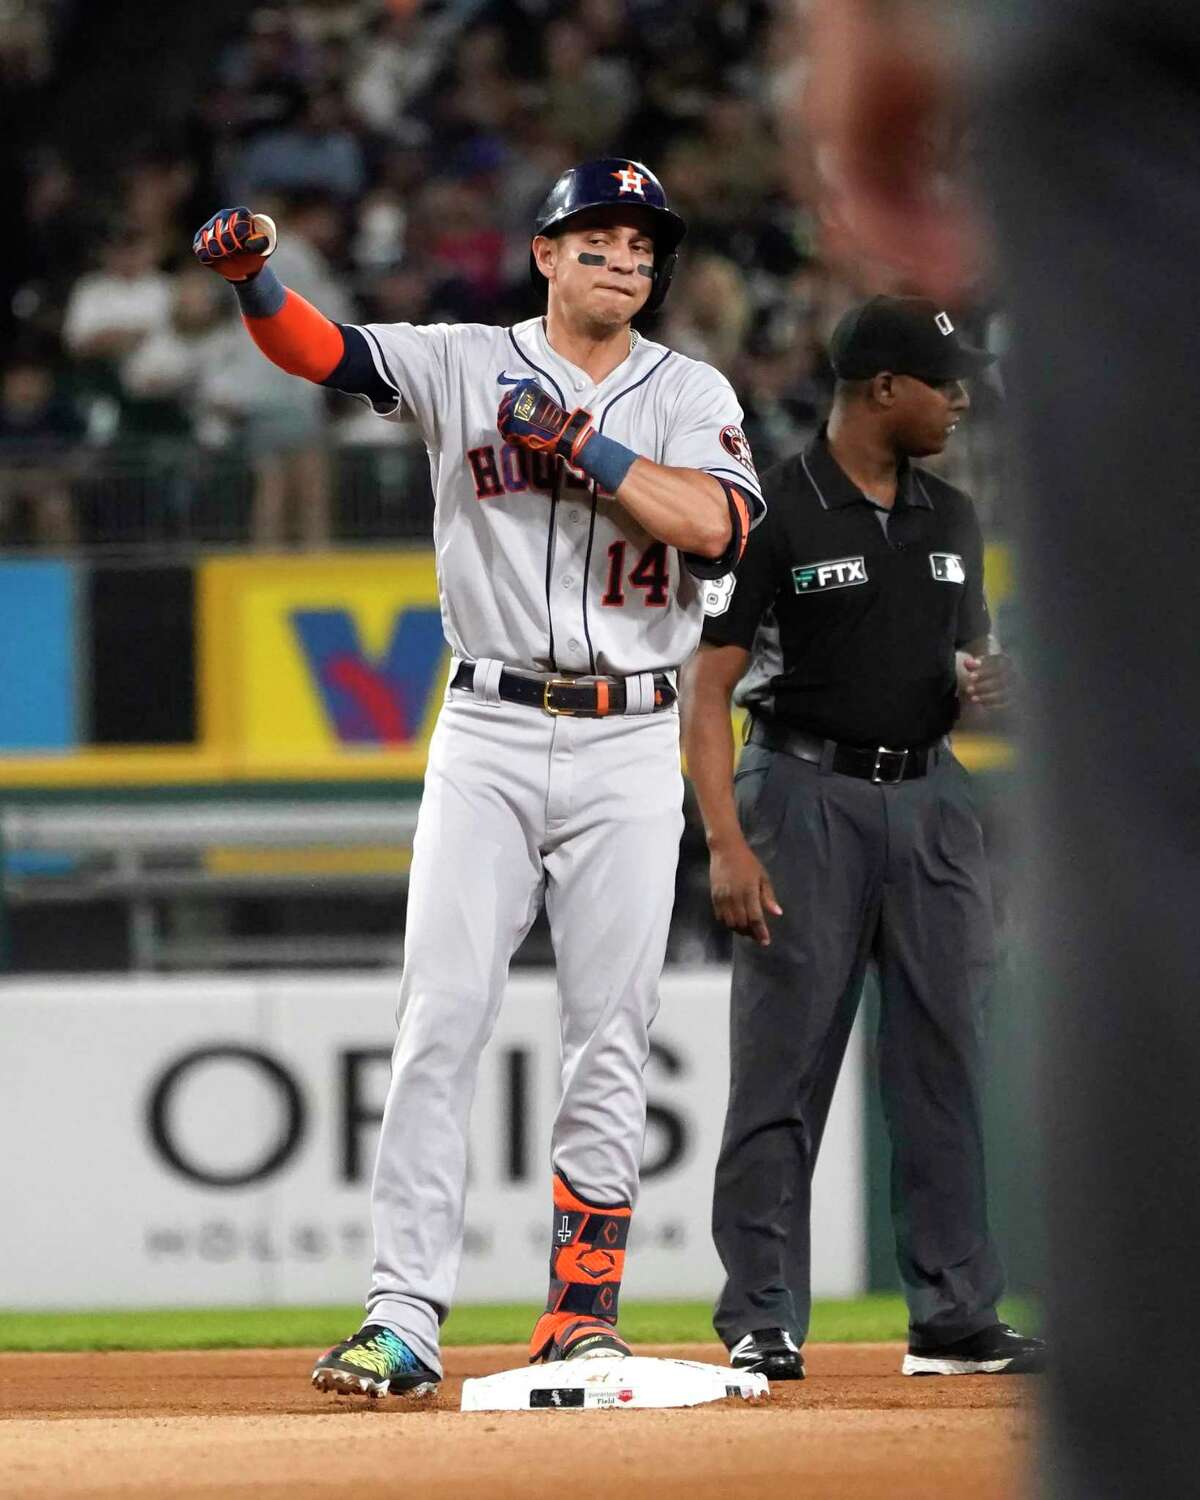 Houston Astros' Mauricio Dubon celebrates his double off Chicago White Sox relief pitcher Jose Ruiz during the sixth inning of a baseball game Tuesday, Aug. 16, 2022, in Chicago. (AP Photo/Charles Rex Arbogast)